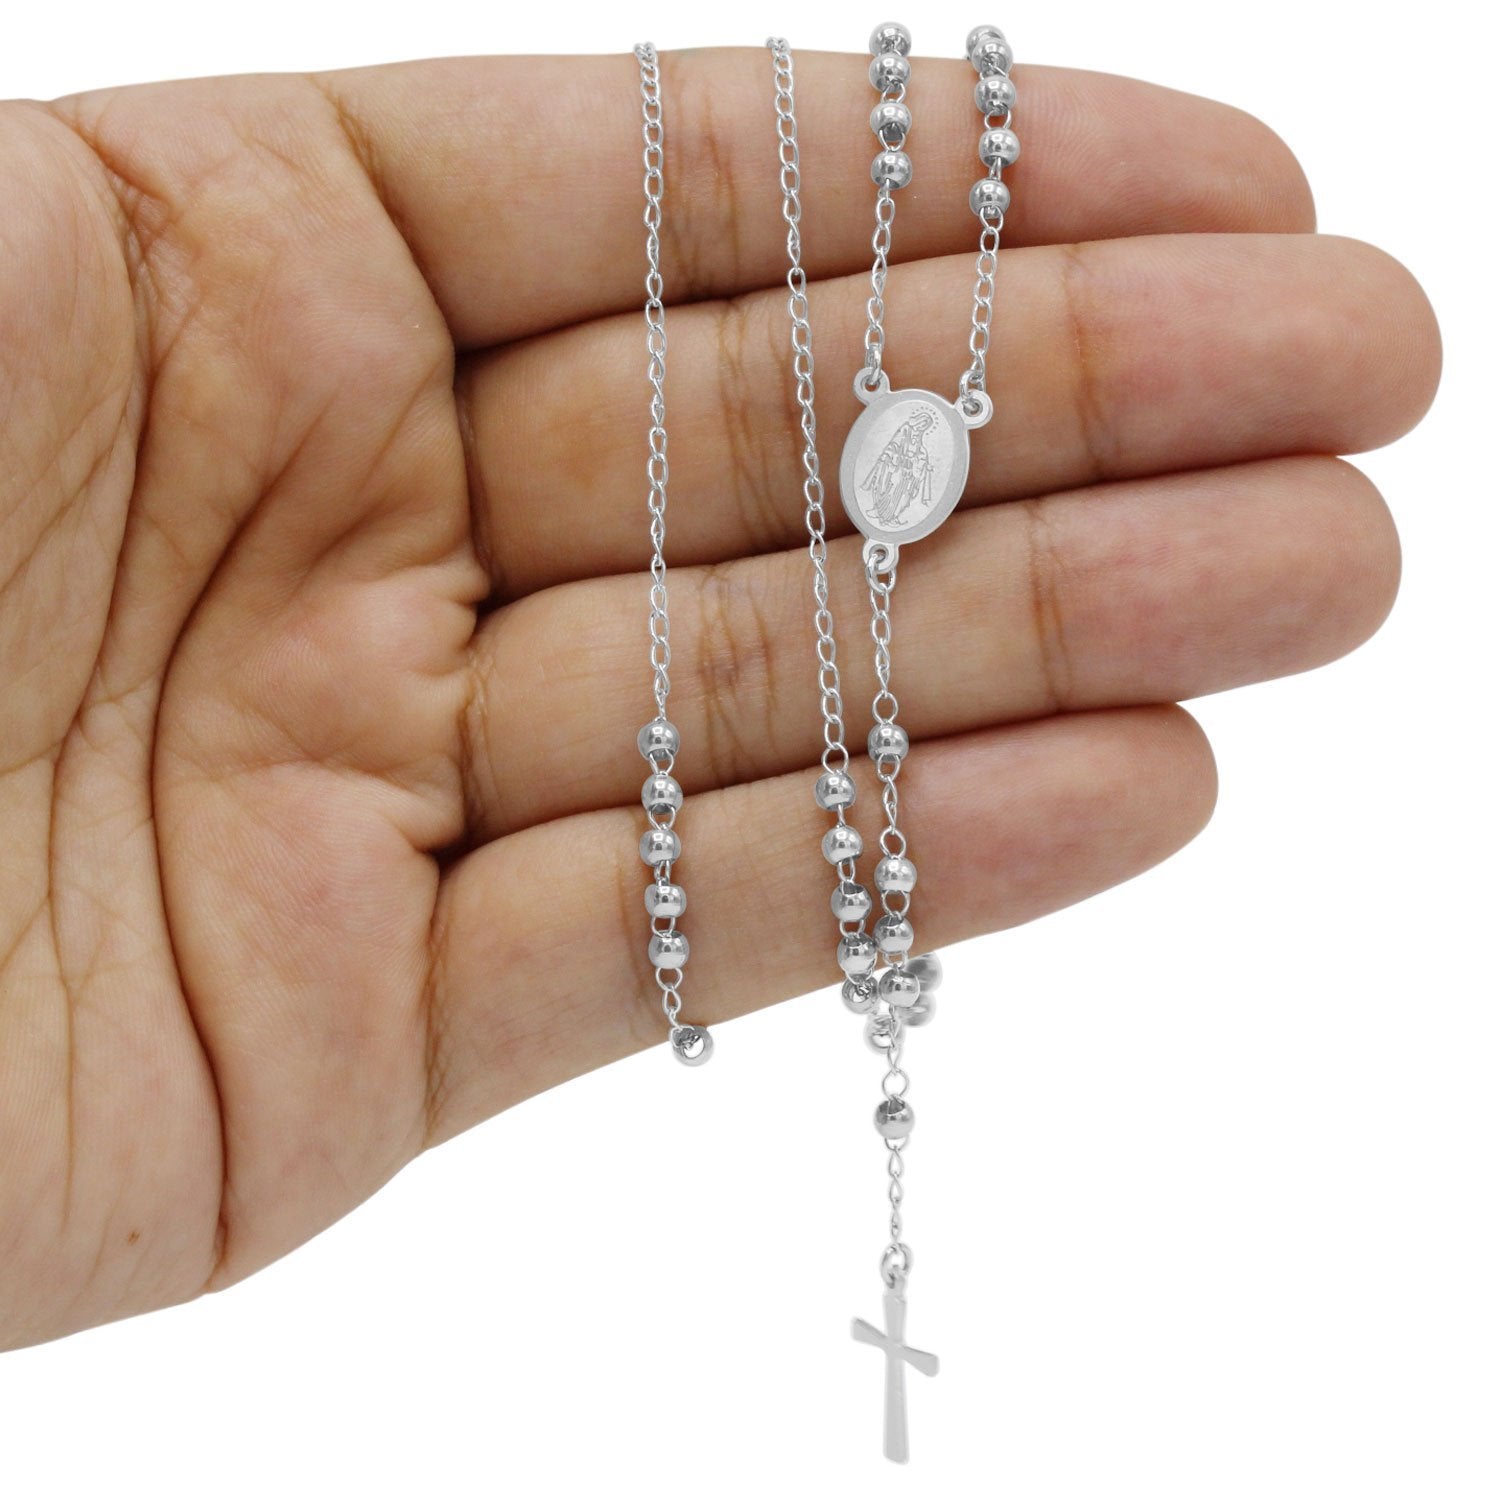 Traditional Silver Rosary Necklace Five Decade Catholic Prayer Beads 3mm